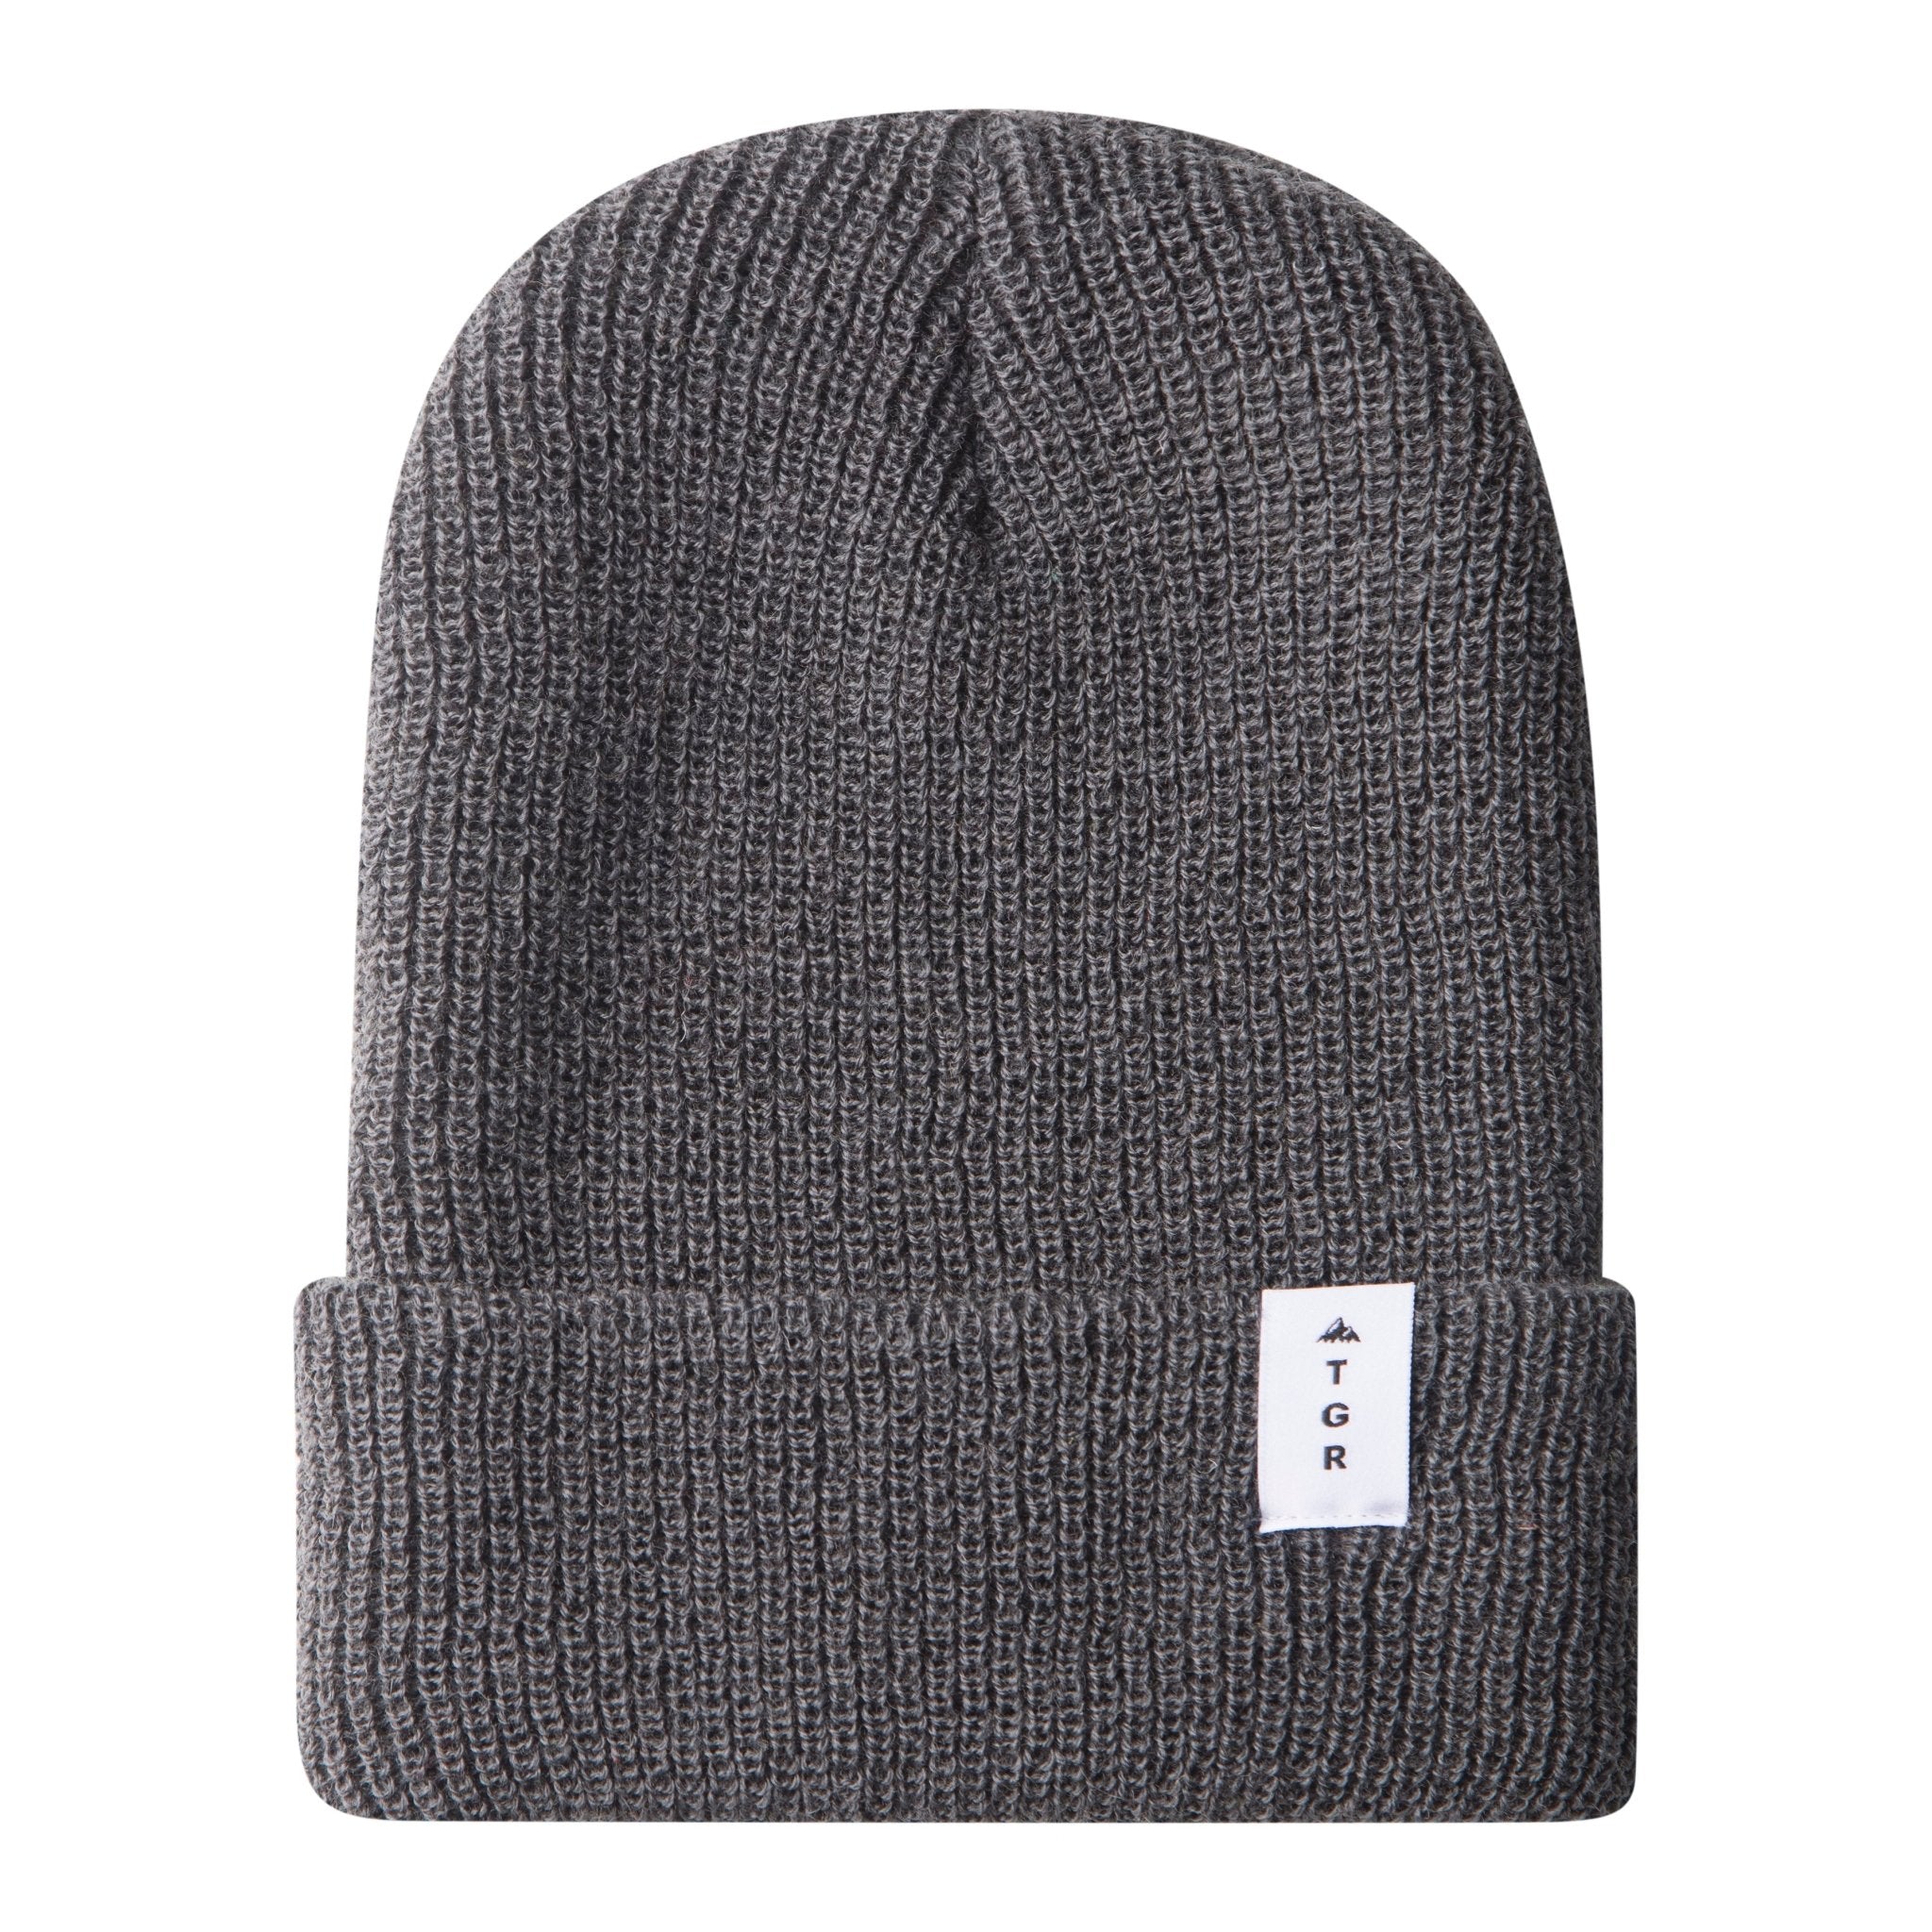 Wool Military Beanie - Made in USA - Teton Gravity Research